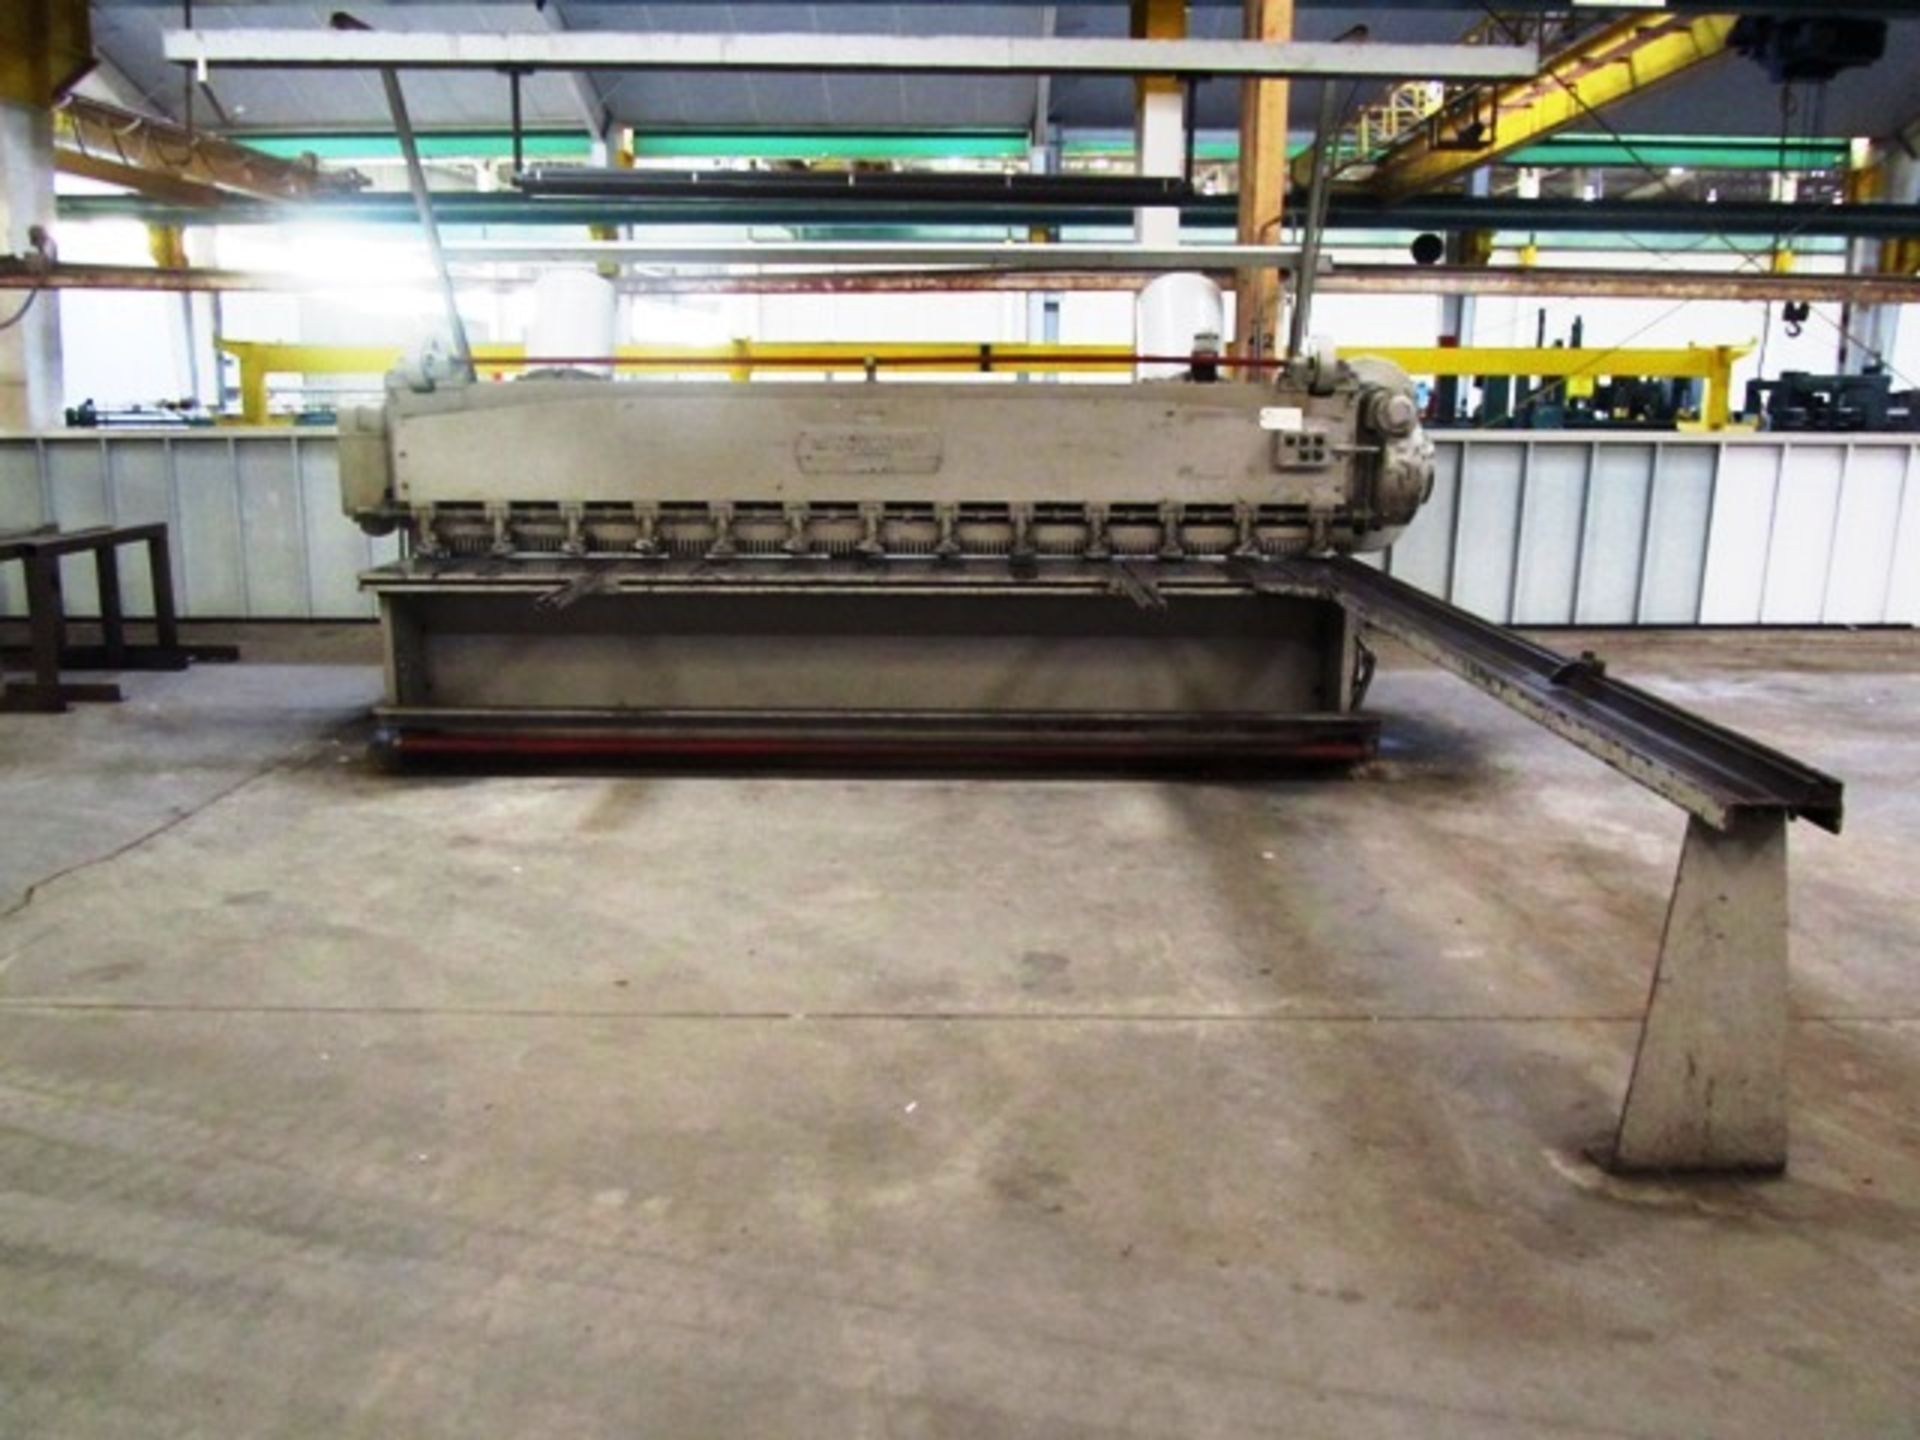 Cincinnati 12' x 3/16'' Mechanical Shear with Front Operated Power Backgauge Model 1412, Right - Image 3 of 5